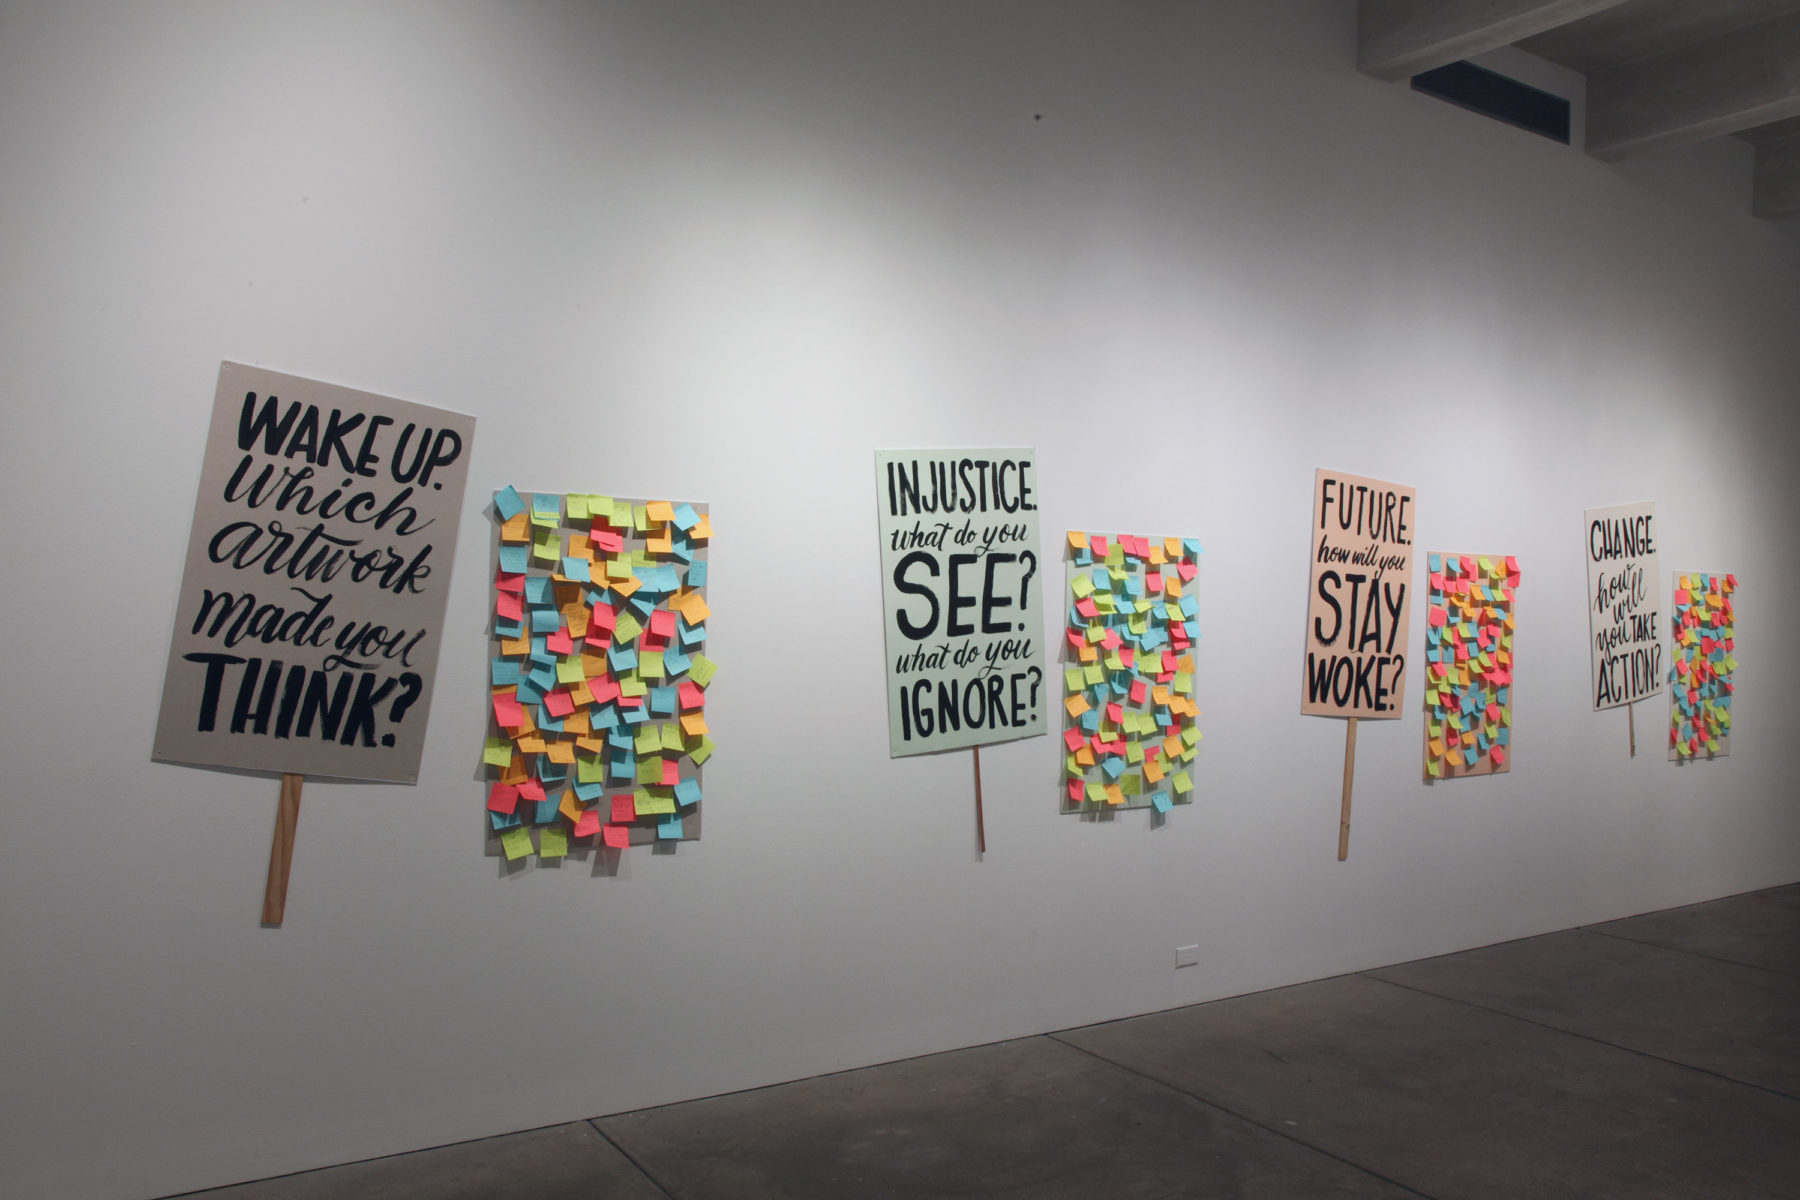 On a gallery wall, four stylized protest posters bear phrases such as Wake Up. Which artwork made you think? Next to each poster is a board covered with post-it notes.